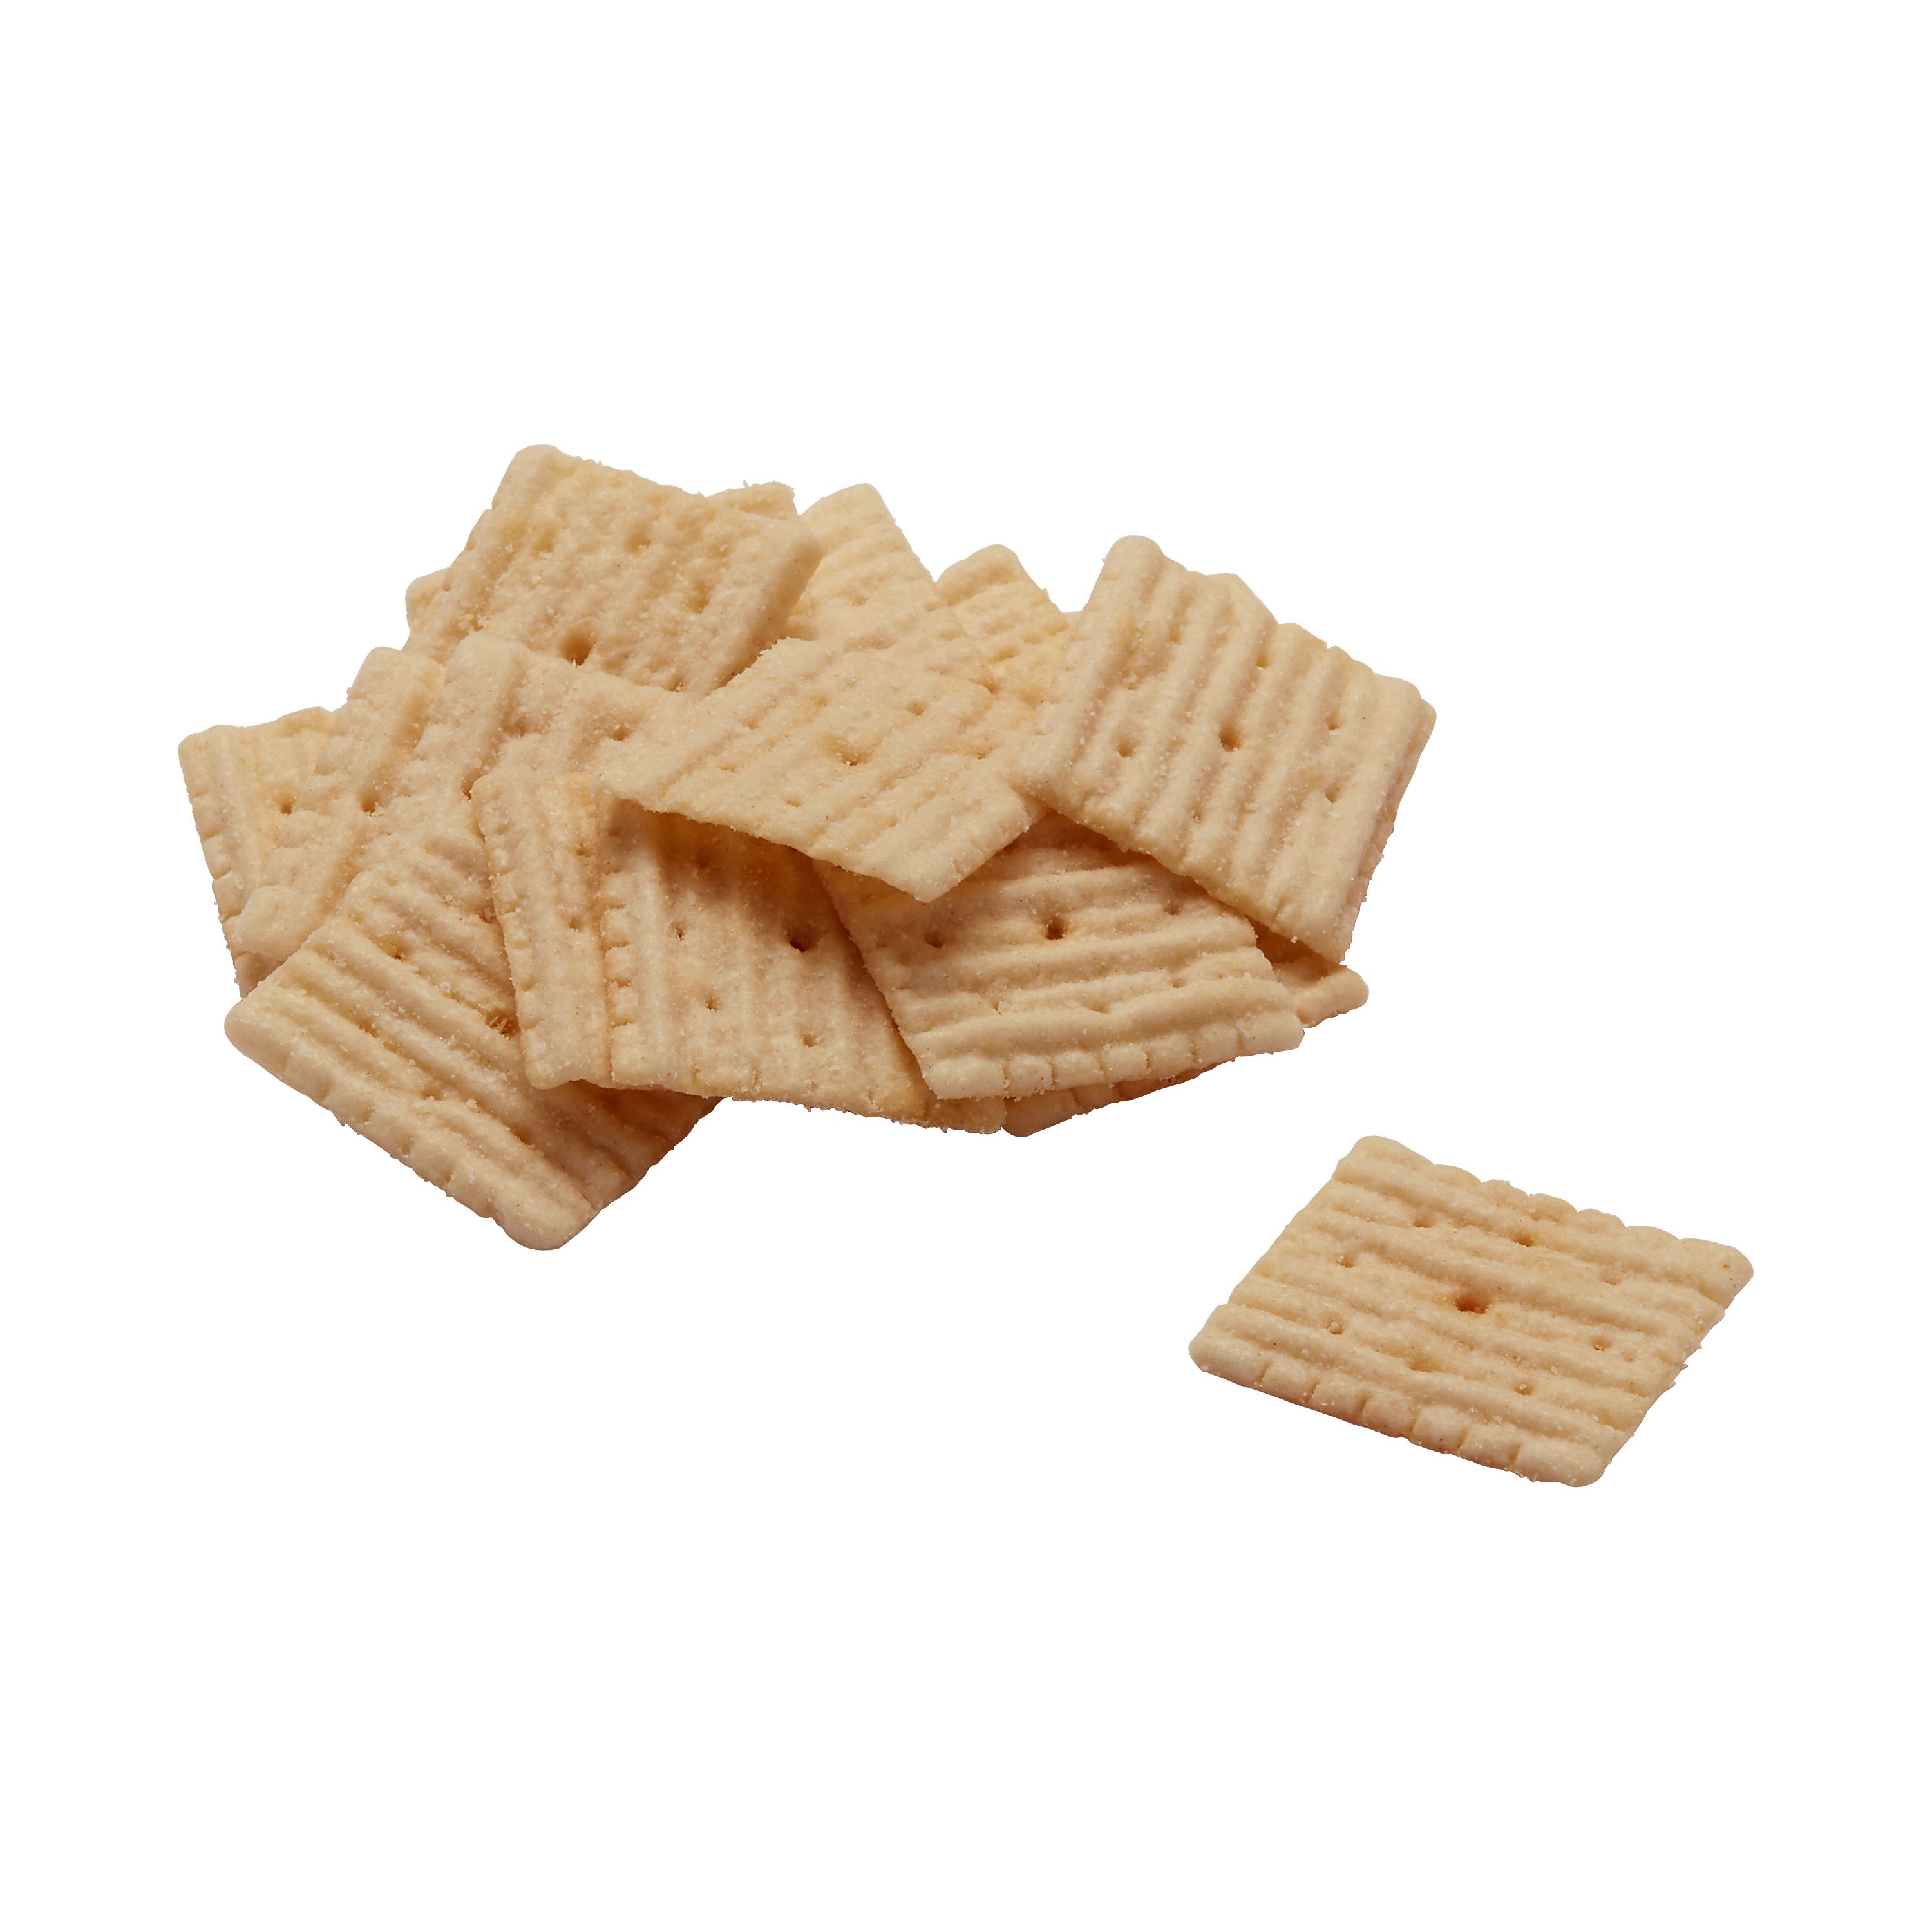 Cheez-It® Grooves® Sharp White Cheddar Crackers